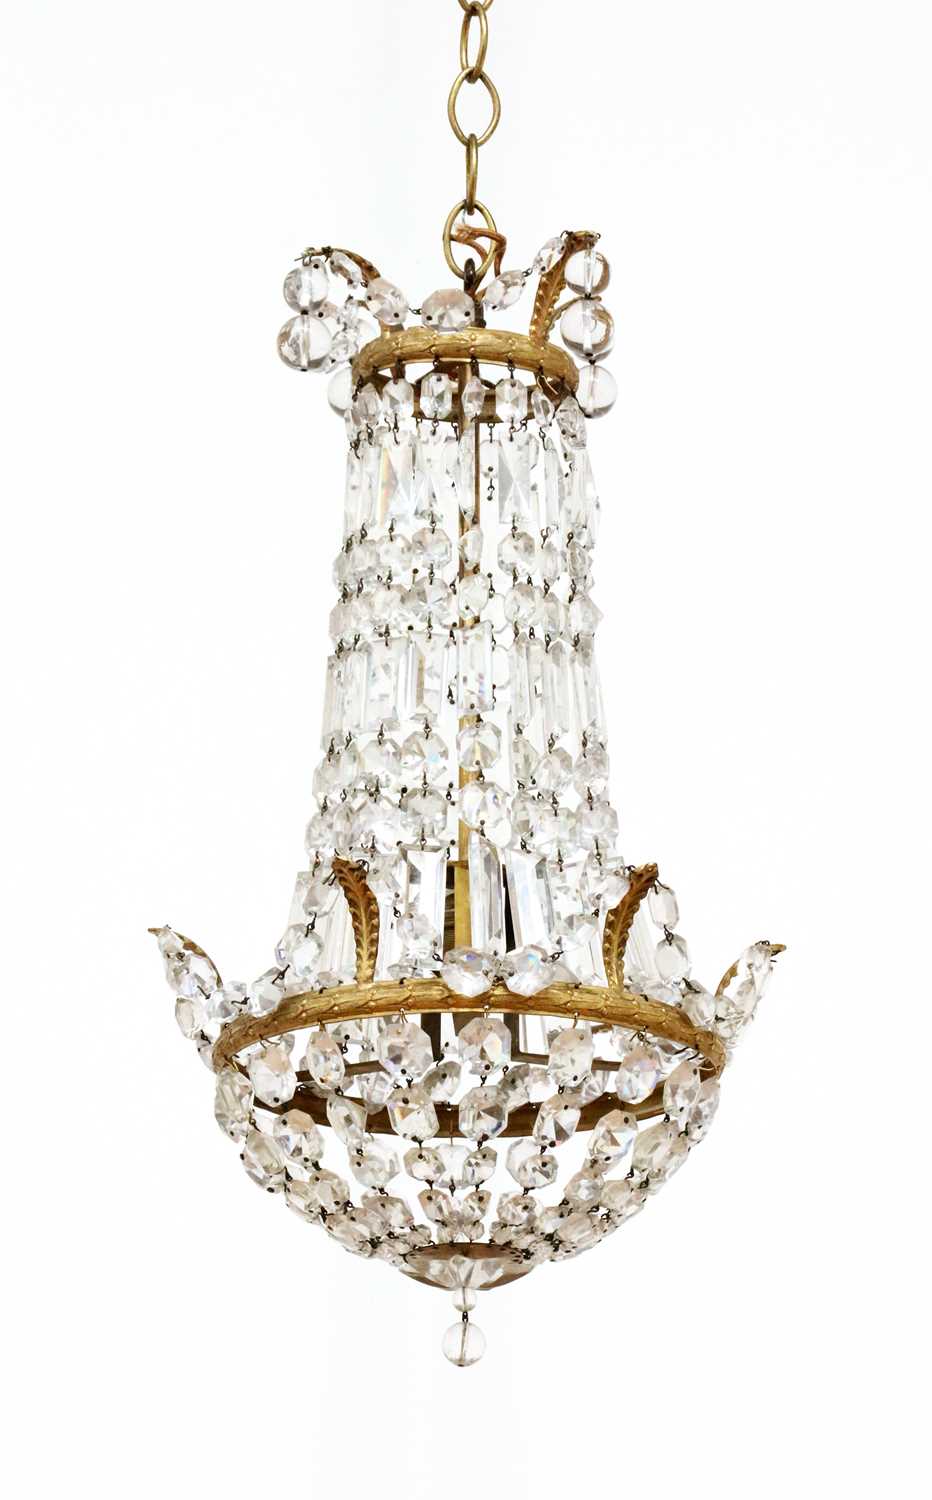 Lot 10 - A small Empire-style gilt-brass and cut-glass ceiling light